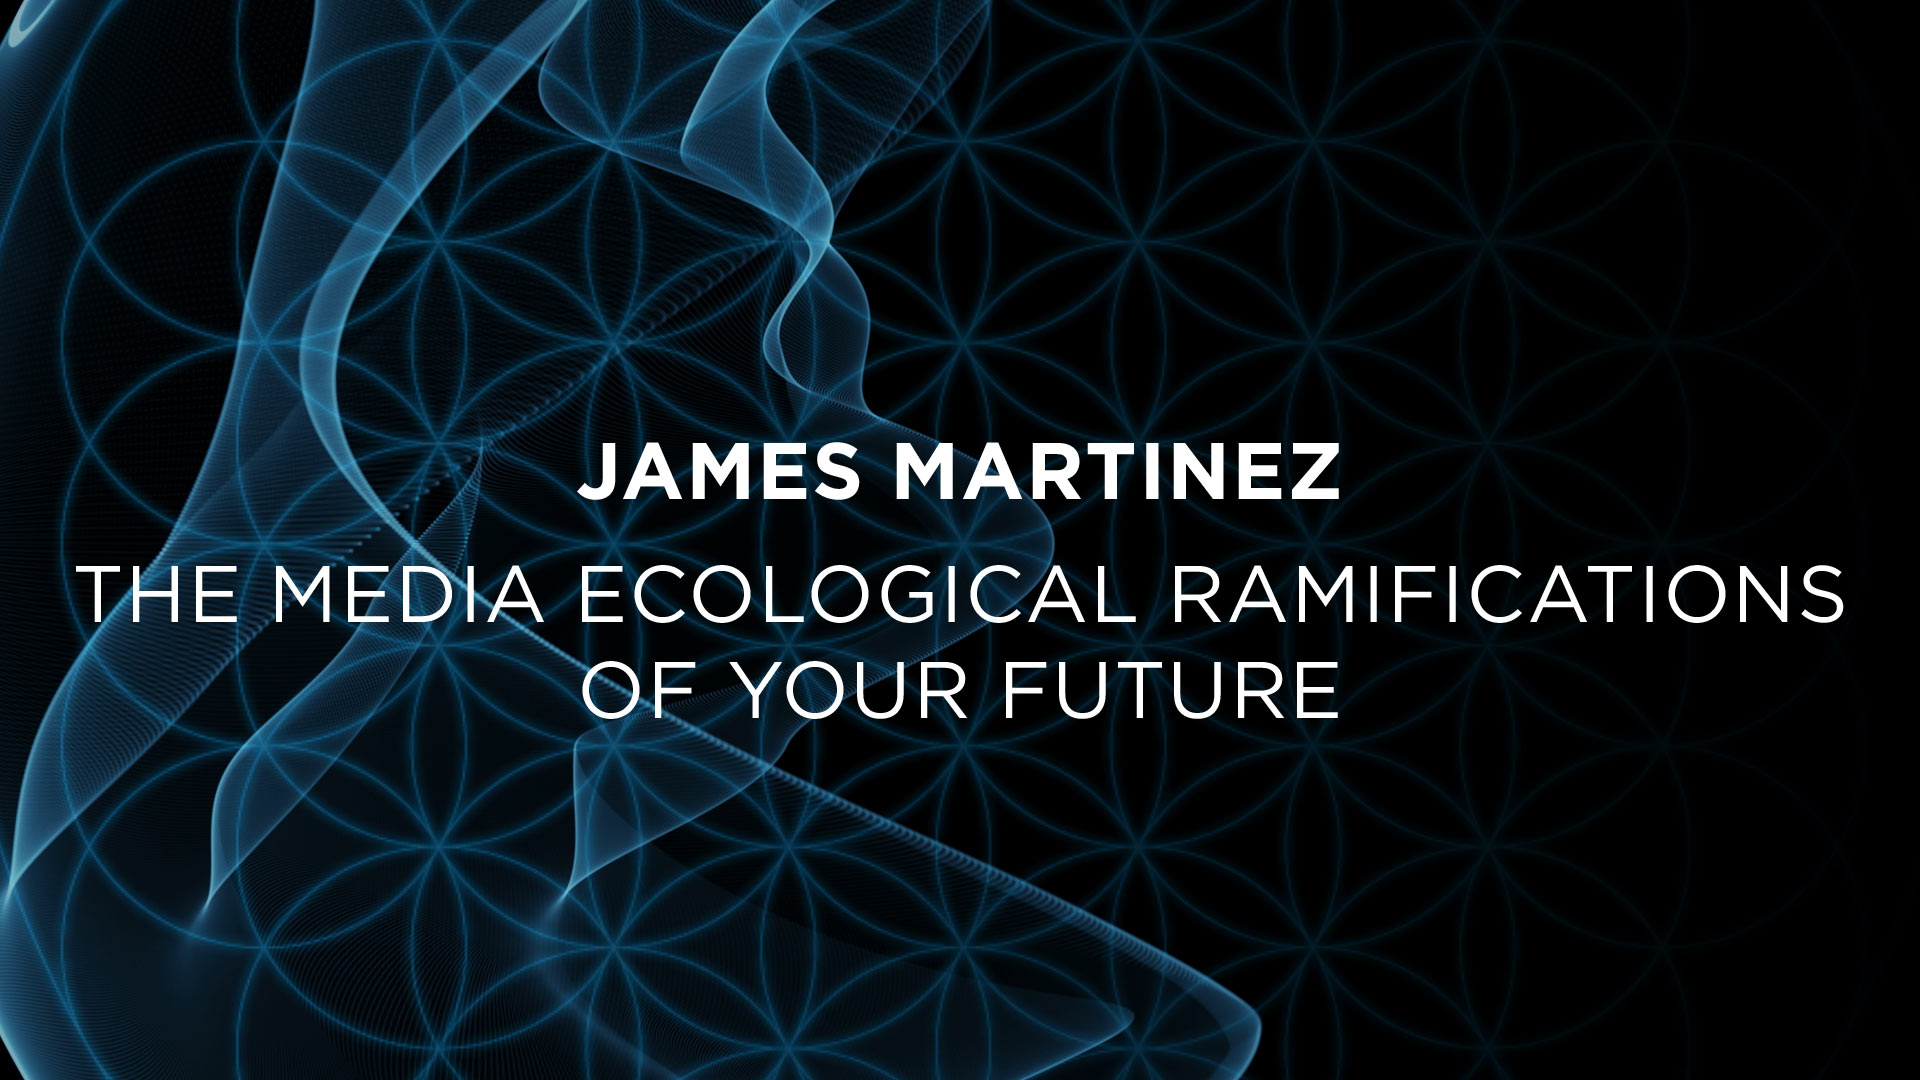 James Martinez – The Media Ecological Ramifications of Your Future